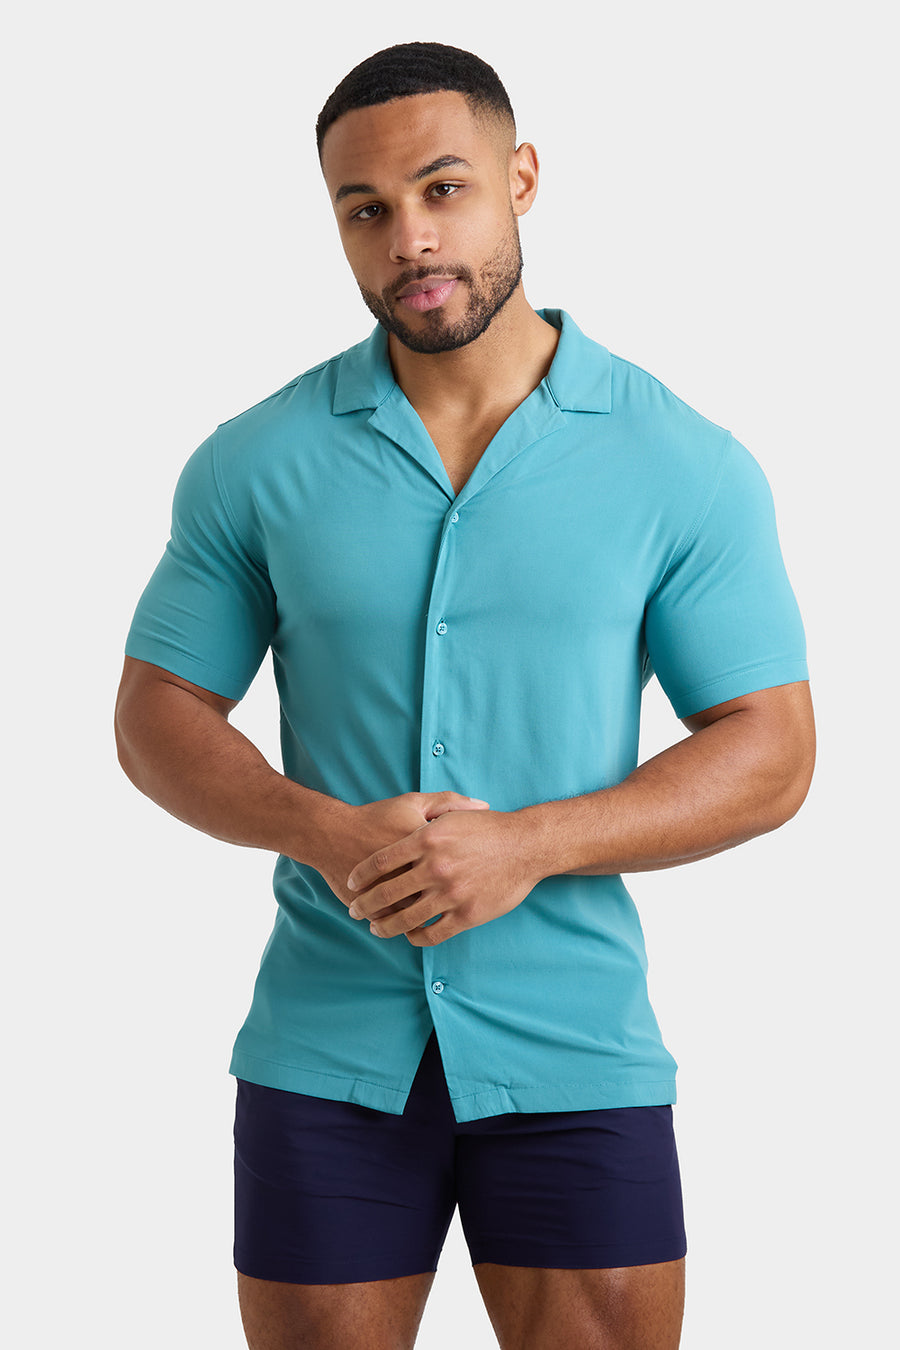 Athletic Fit Short Sleeve Viscose Shirt in Teal - TAILORED ATHLETE - USA